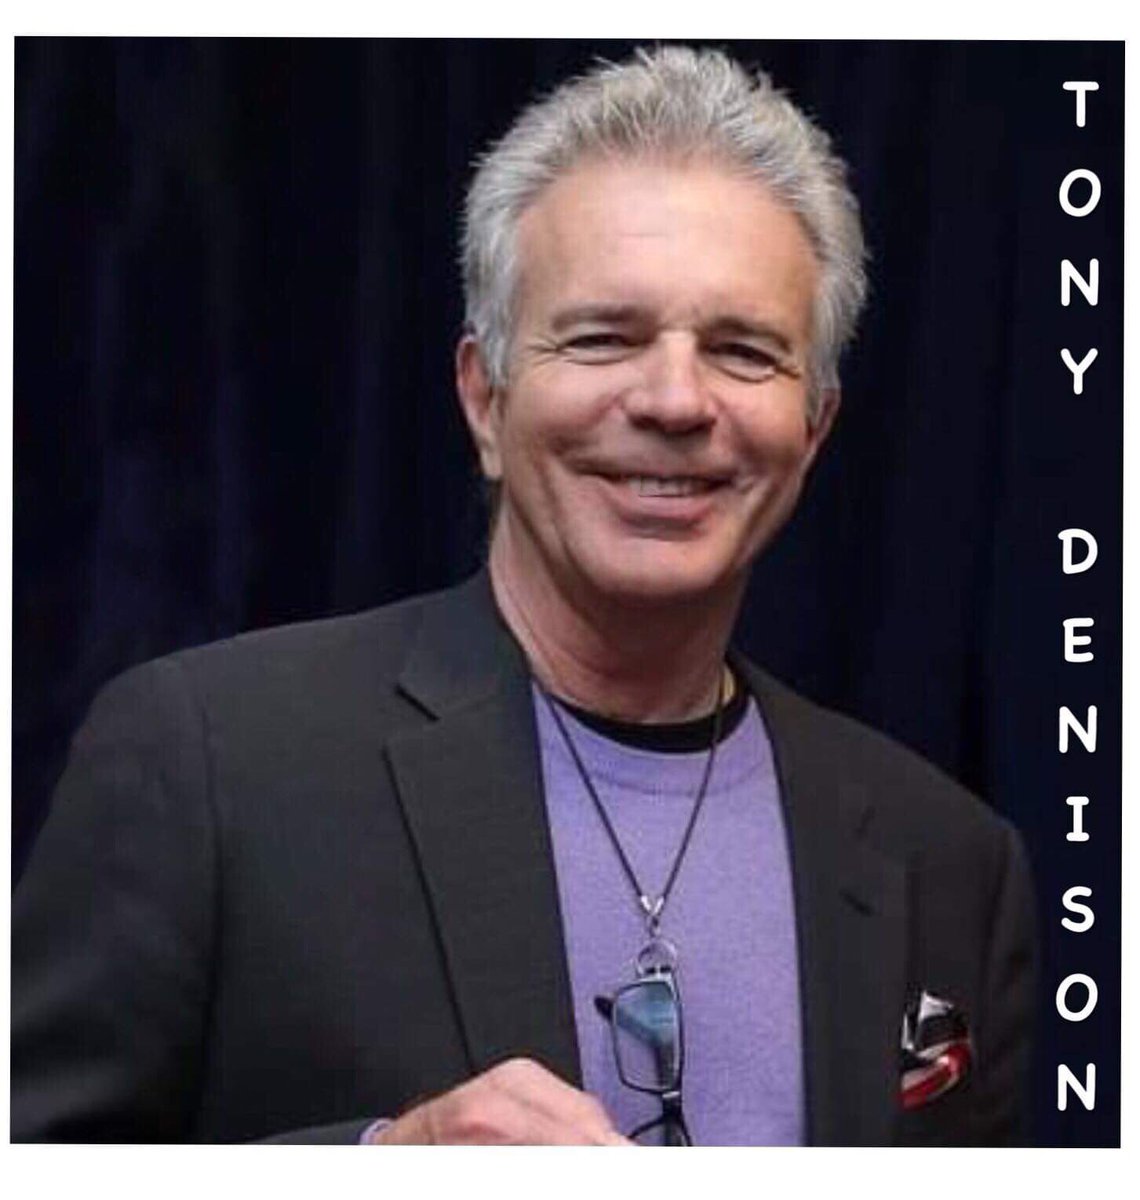 #WednesdayWow Classic or casual style, always smooth 😉😉💜💜 #SharpDressed #CoolGuy #DDD #TonyDenison